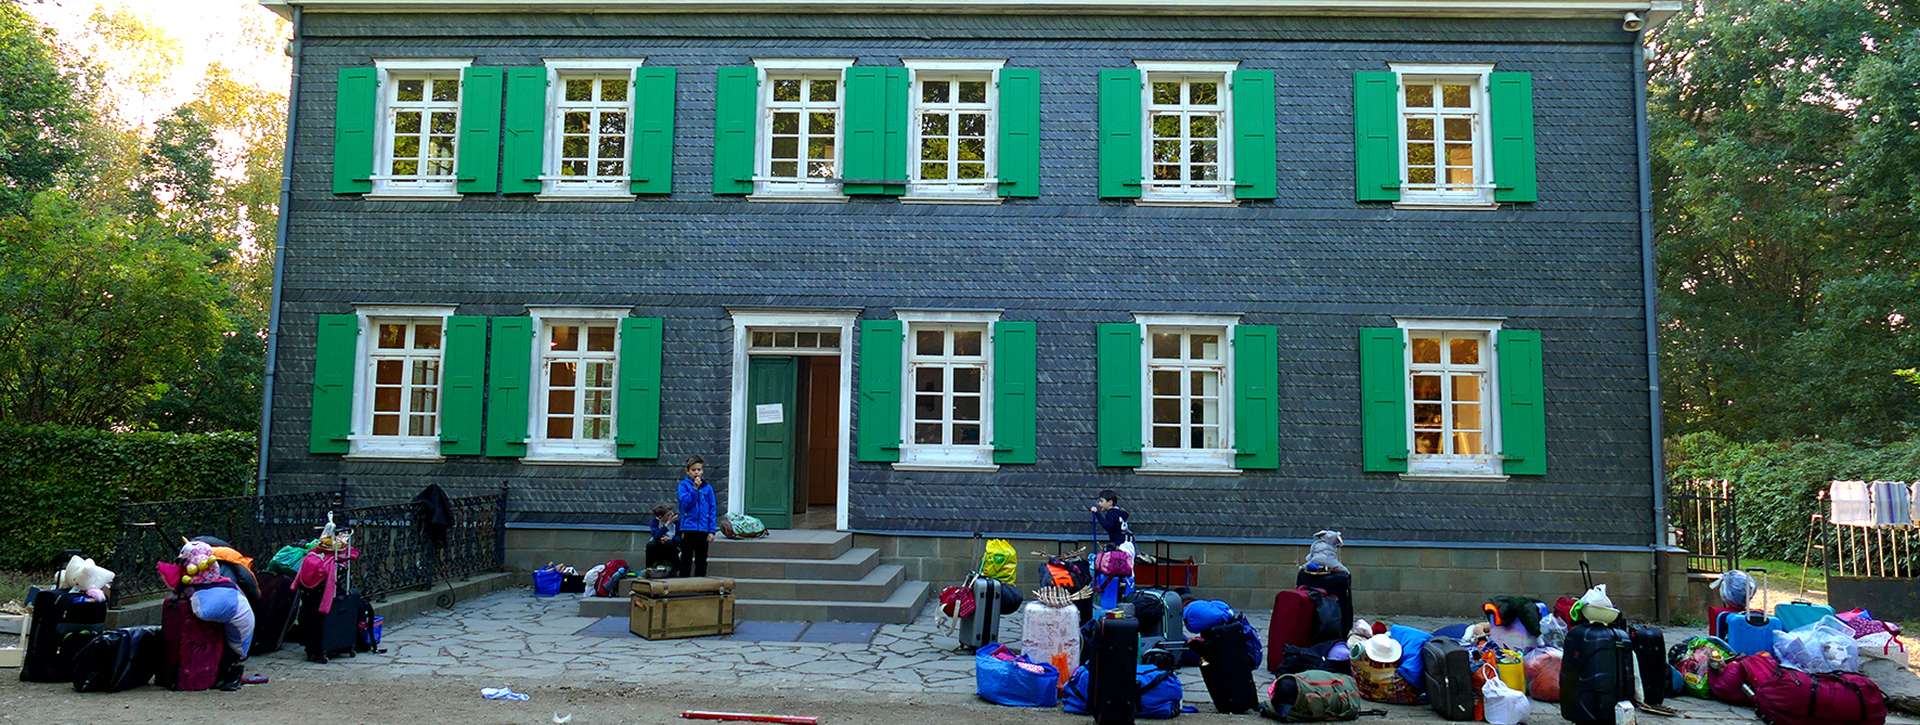 Gray house with green shutters, in front of children with backpacks